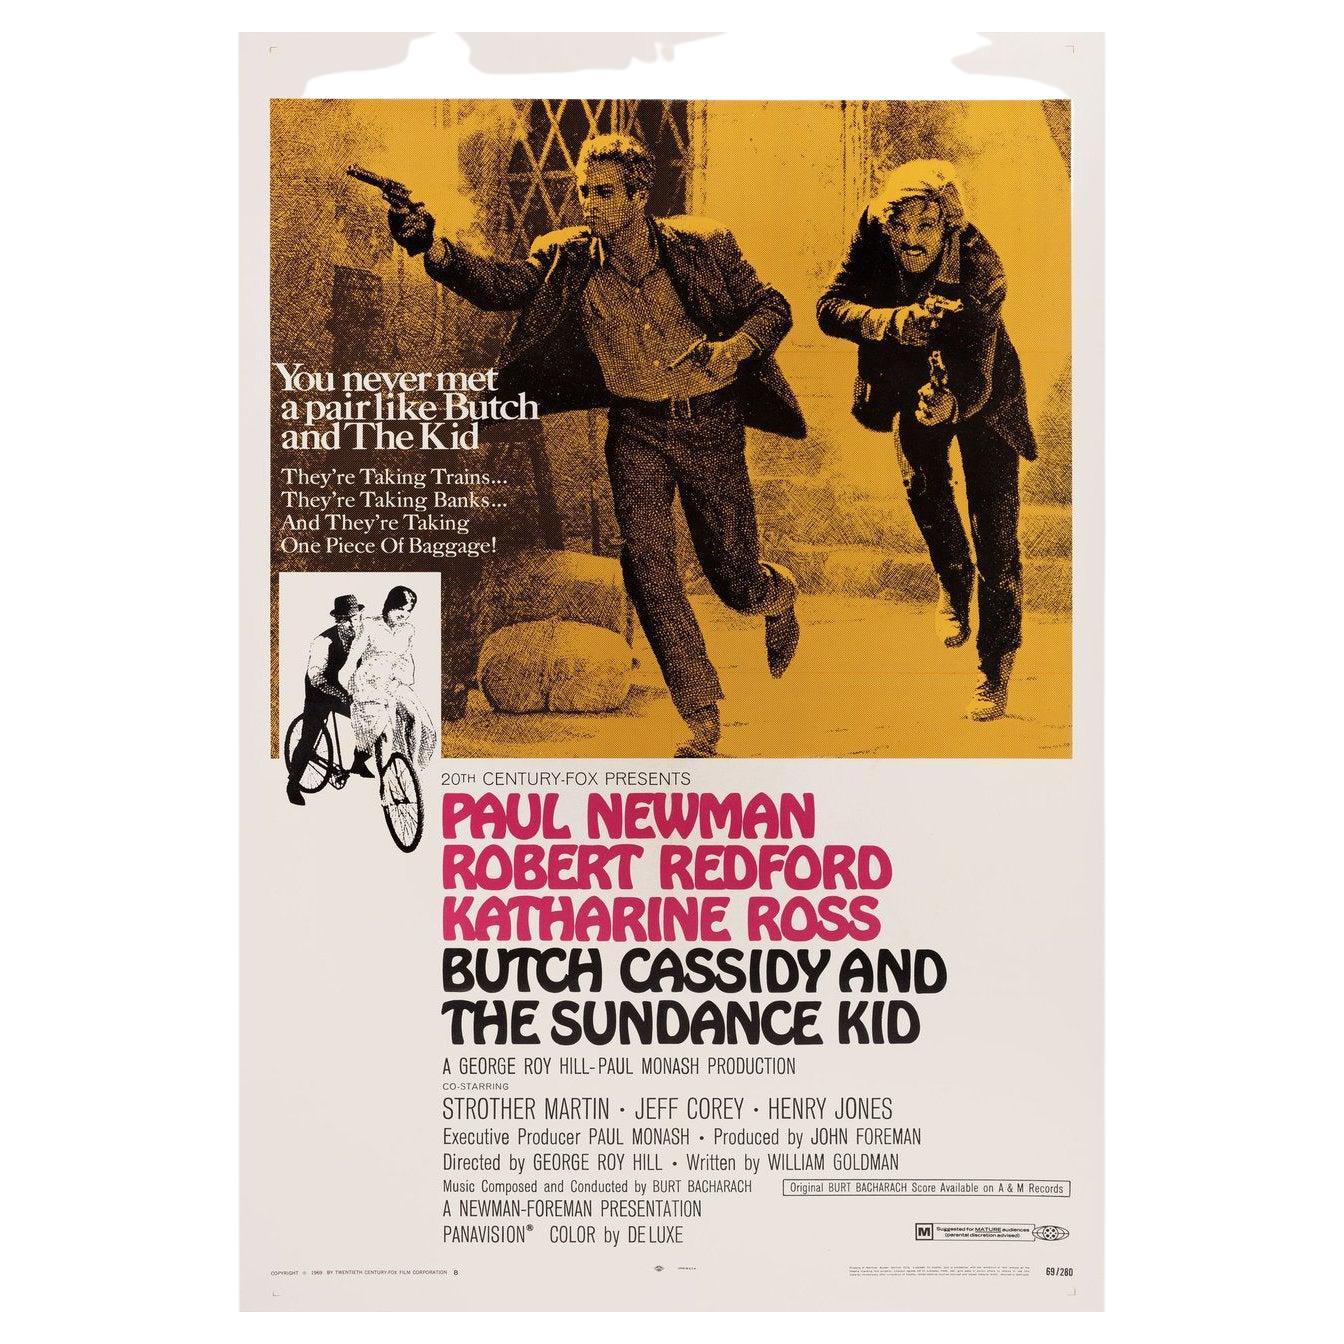 Butch Cassidy and the Sundance Kid 1969 U.S. One Sheet Film Poster